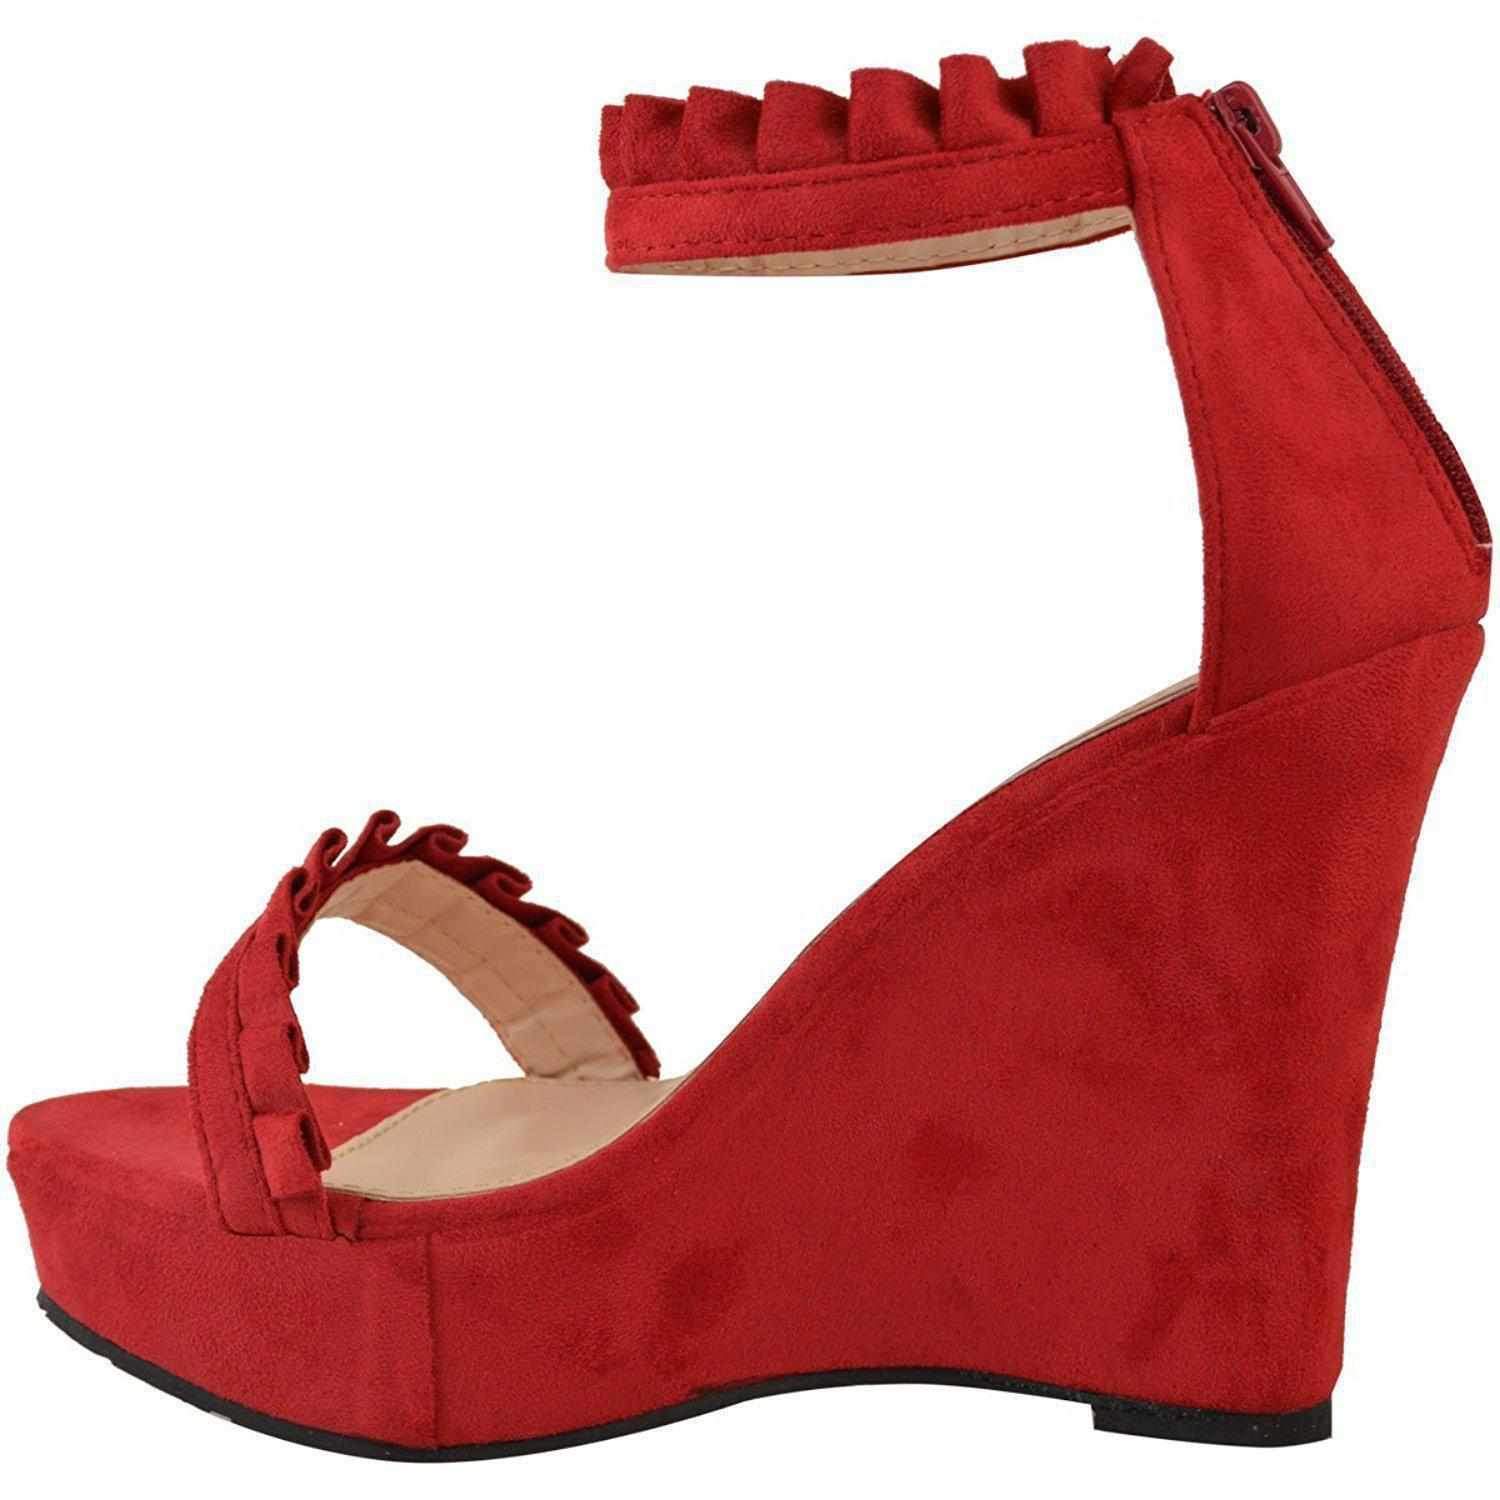 Red Faux Suede Ruffled Platform Wedge | Women's Wedges - Edgy Couture